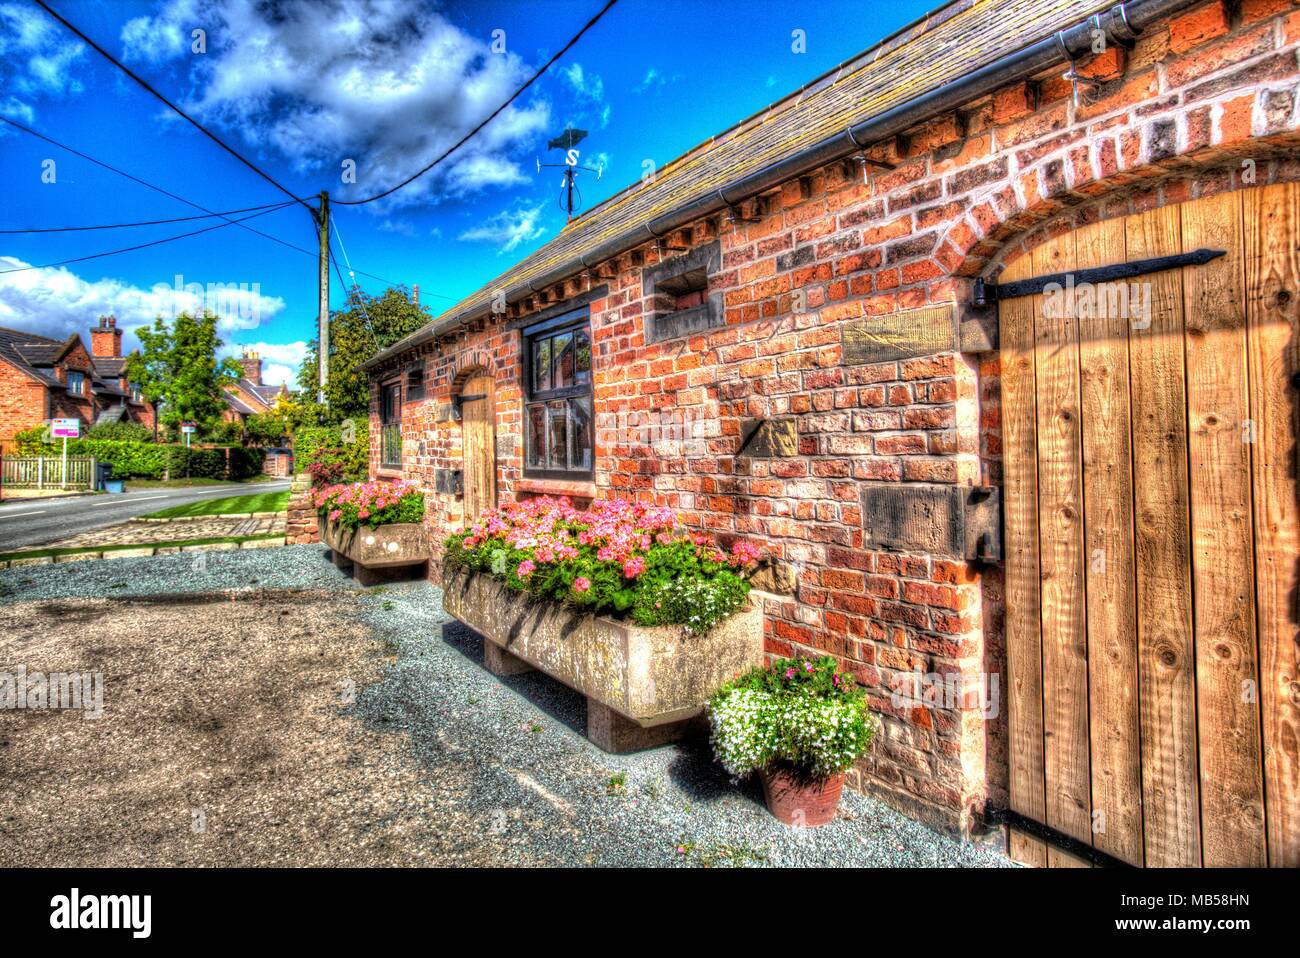 Village of Shocklach, Cheshire, England. Artistic view of a Converted barn house in the village of Shocklach. Stock Photo